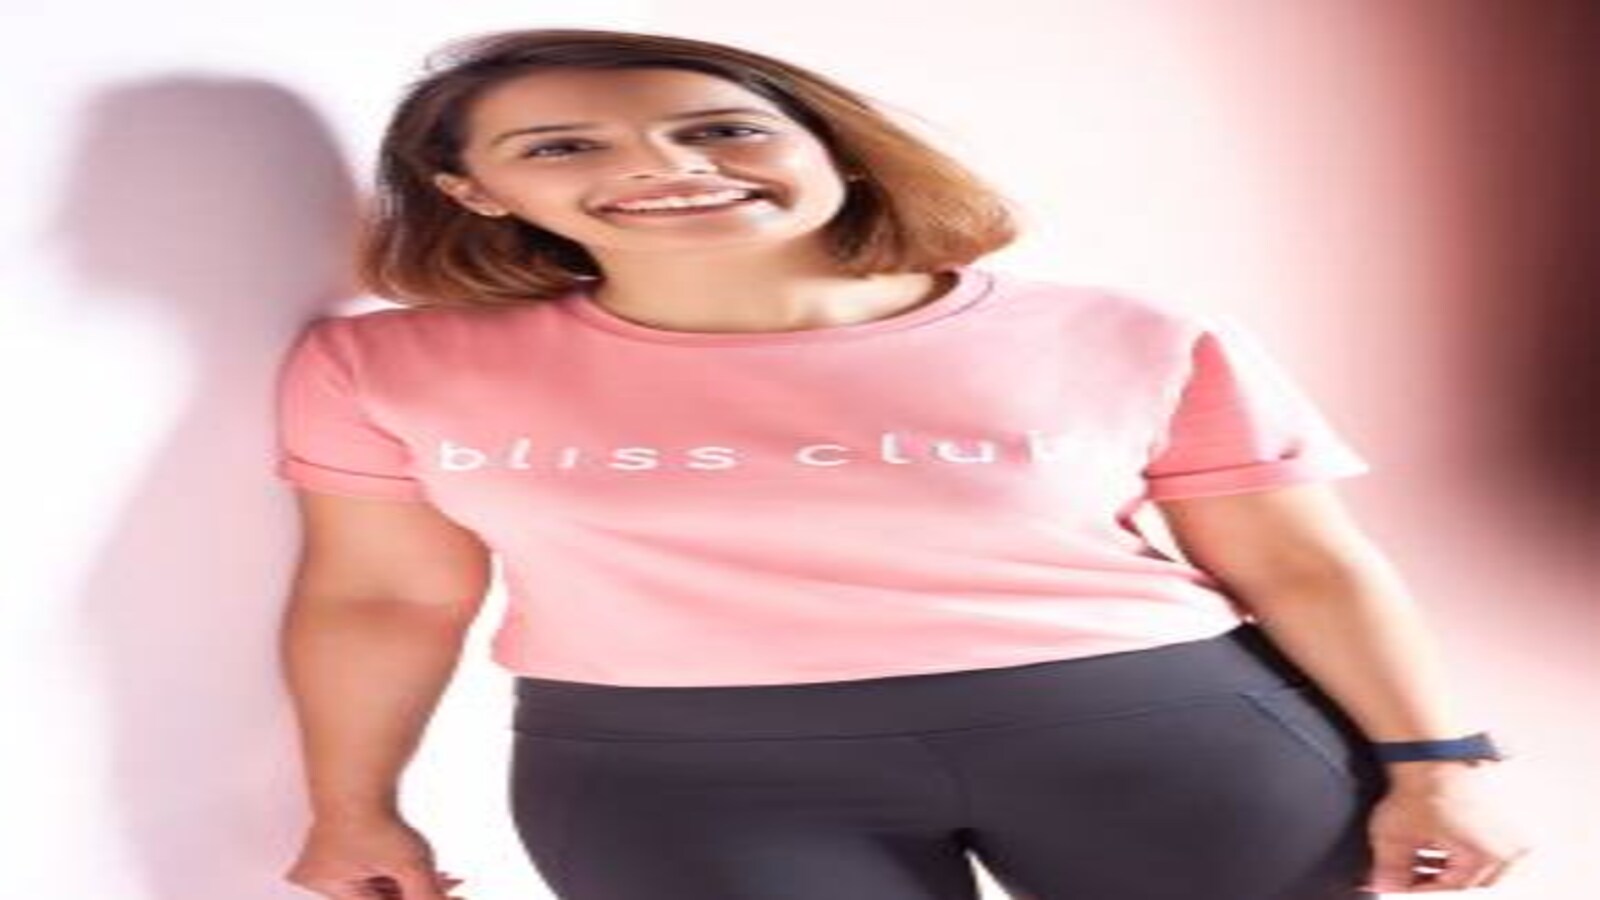 D2C brand BlissClub raises $15 million in Series A led by Eight Roads  Ventures, Elevation Capital